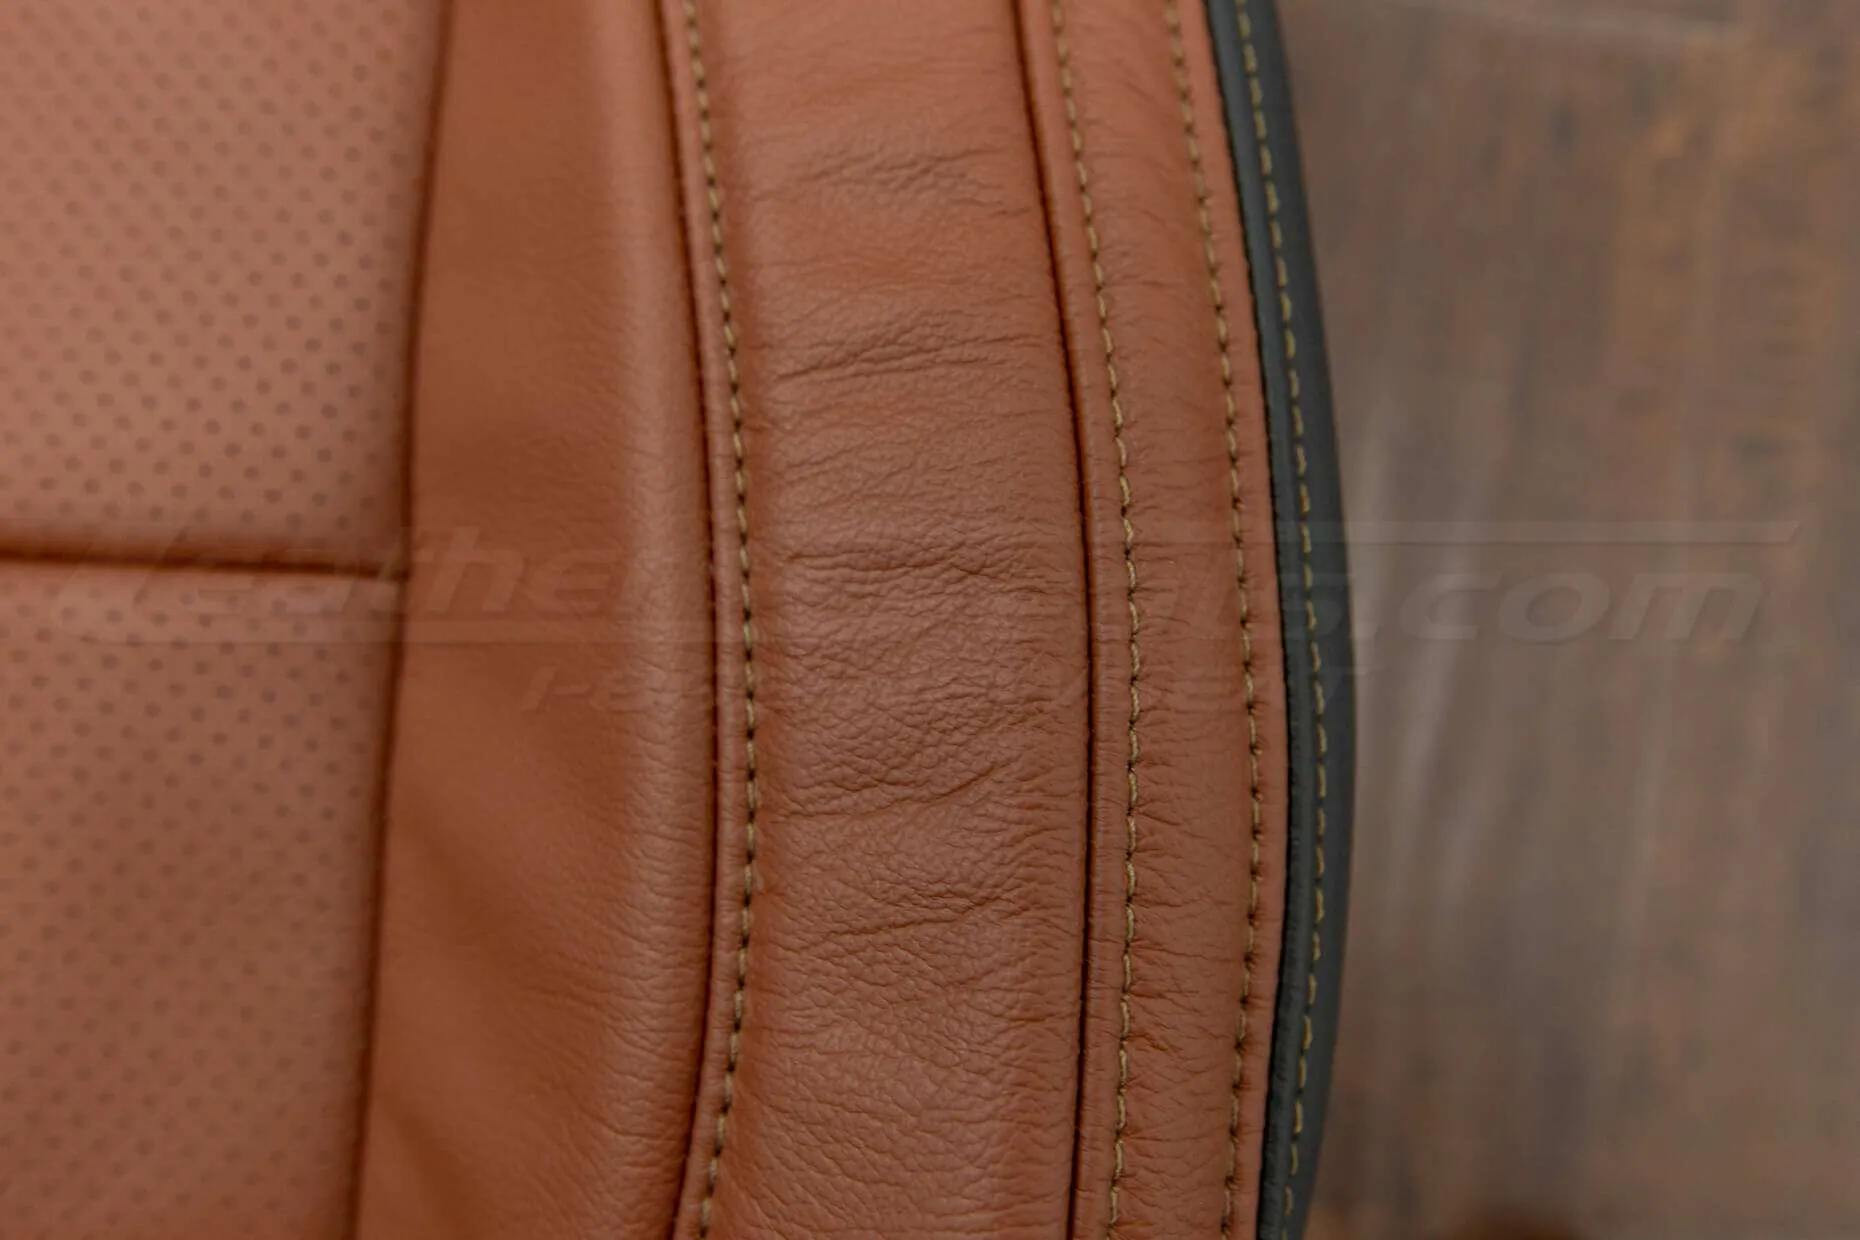 Ford Mustang upholstery kit -Mitt Brown - Side double-stitching close-up